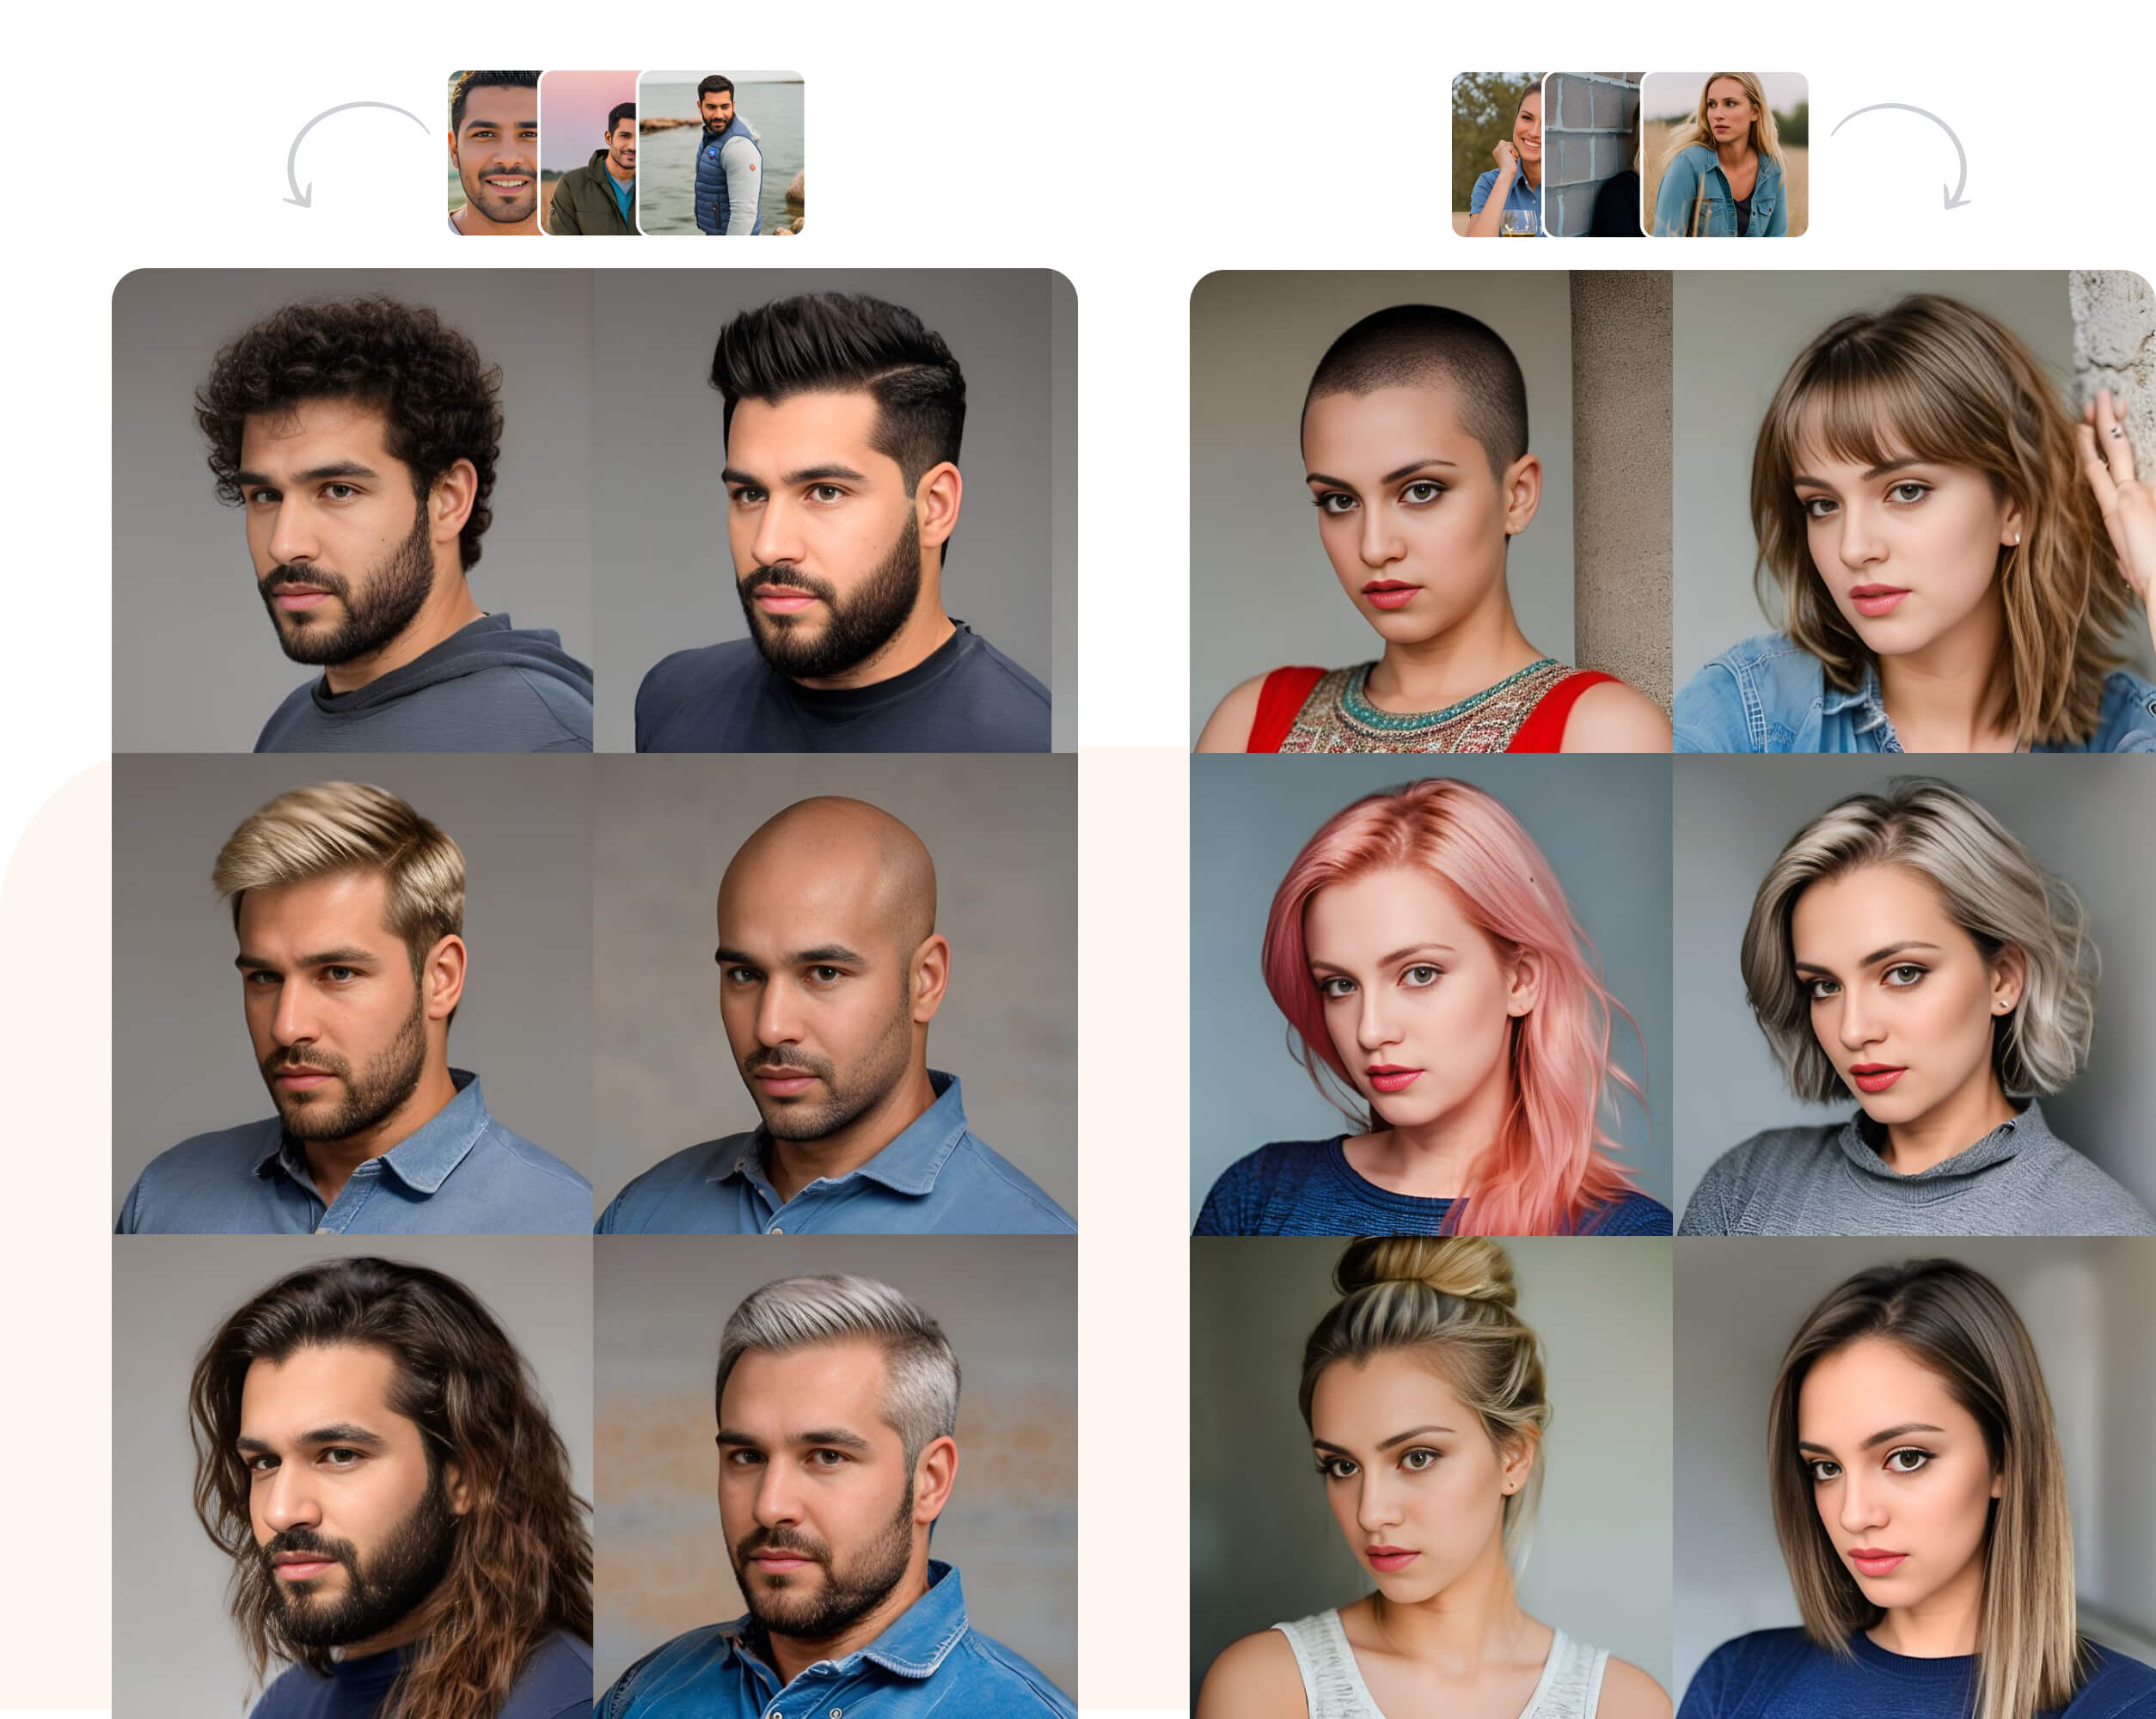 Hairstyle Makeover on the App Store